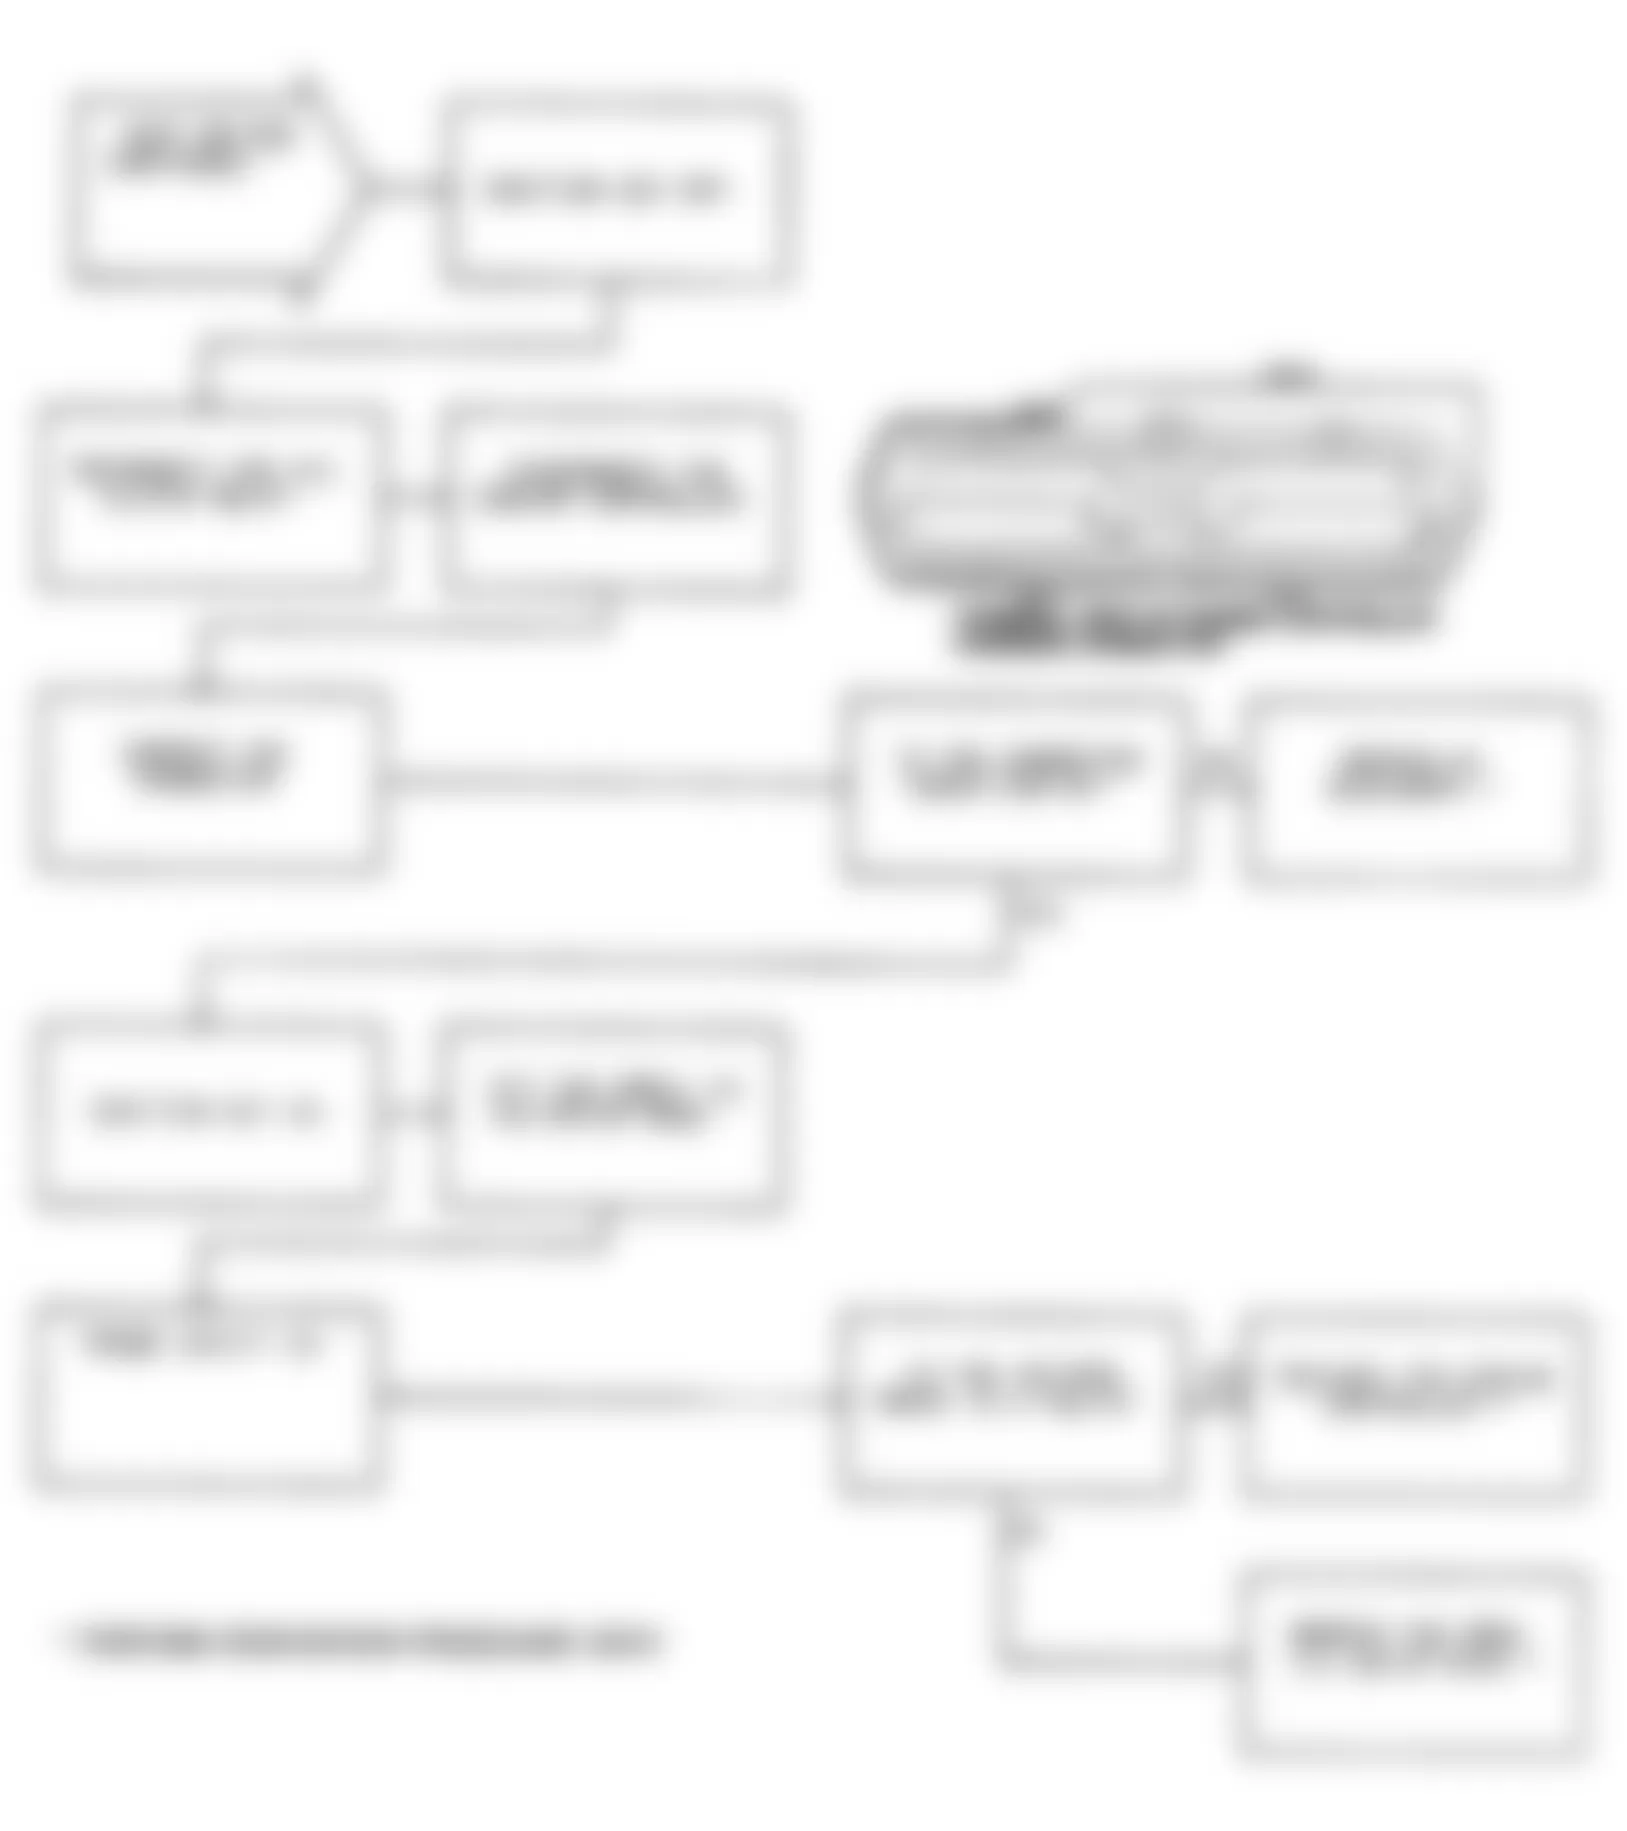 Chrysler New Yorker Salon 1991 - Component Locations -  Test DR-25A Code 33: Flowchart (2 of 2)